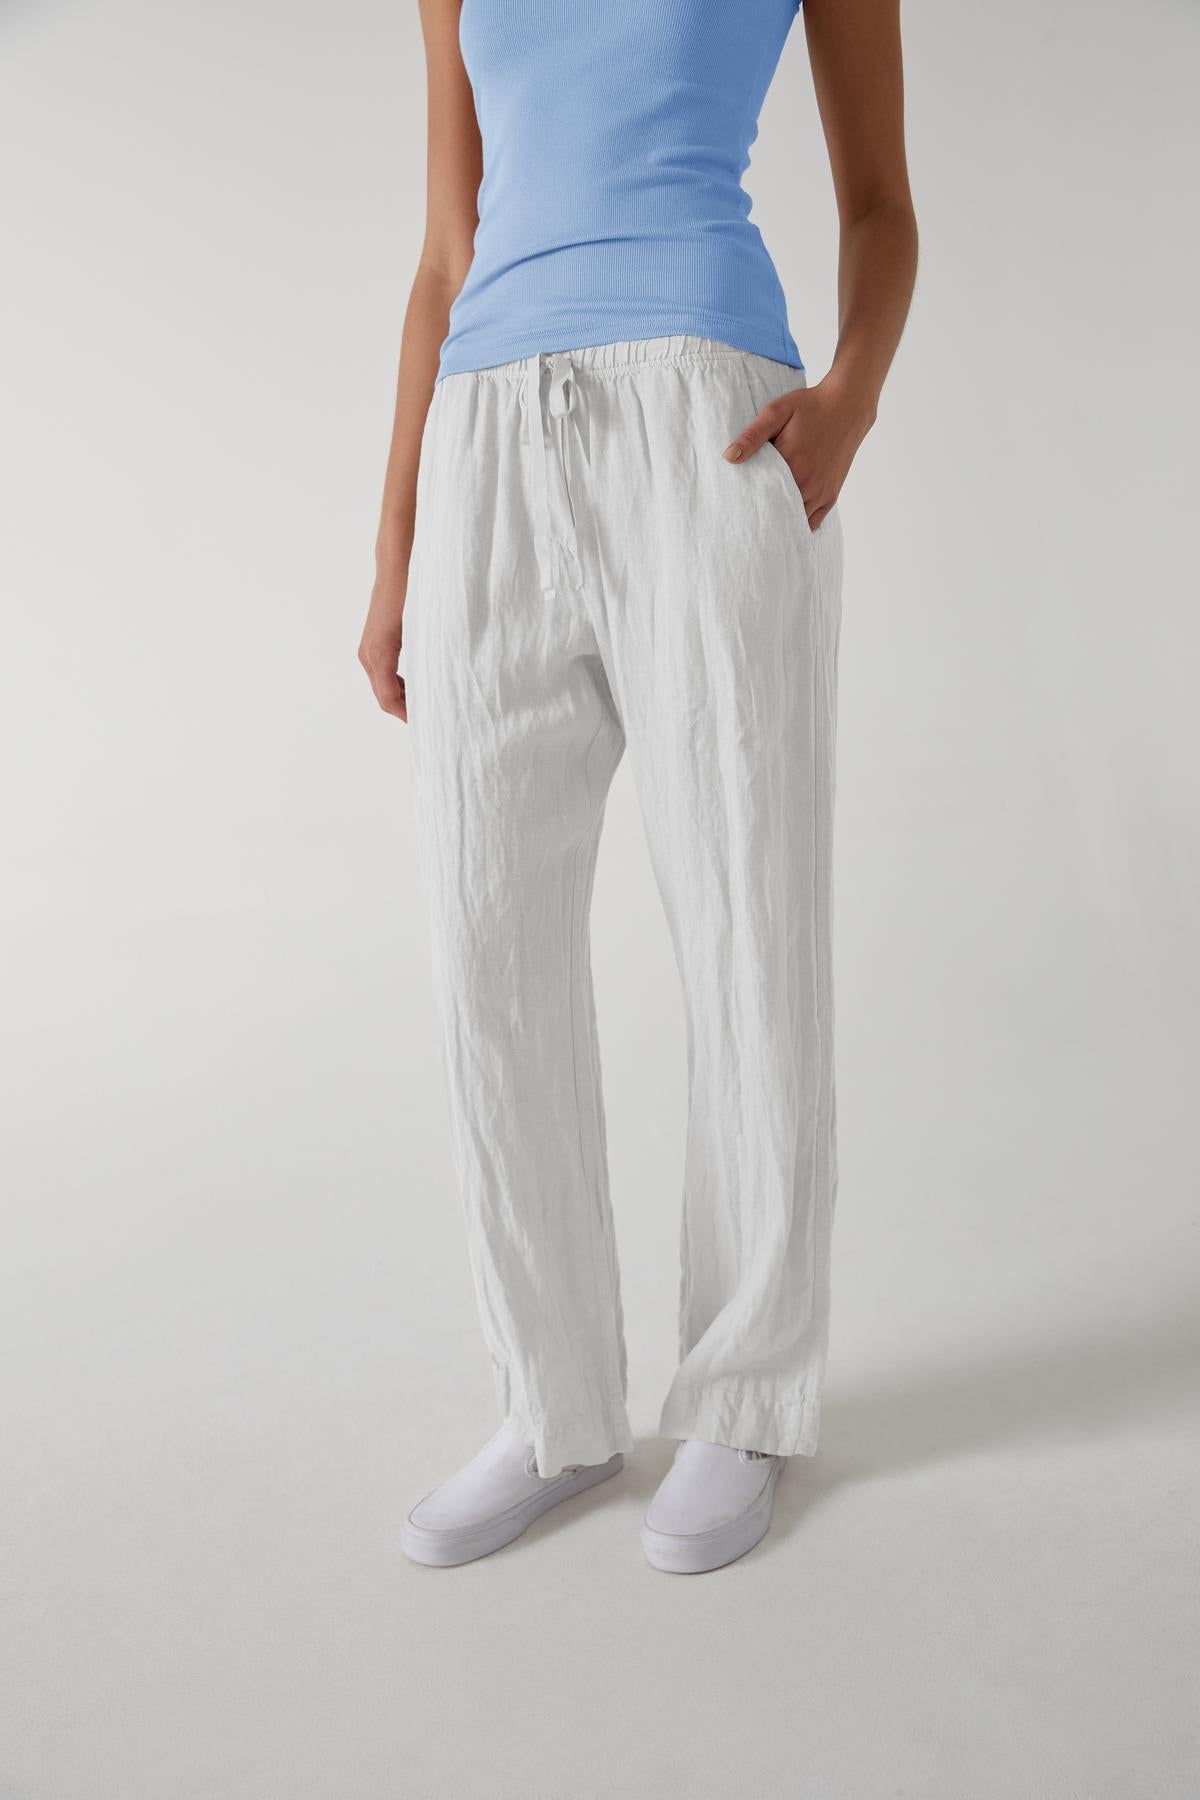 A woman wearing white linen PICO pants by Velvet by Jenny Graham and a relaxed fit blue top.-36168897691841